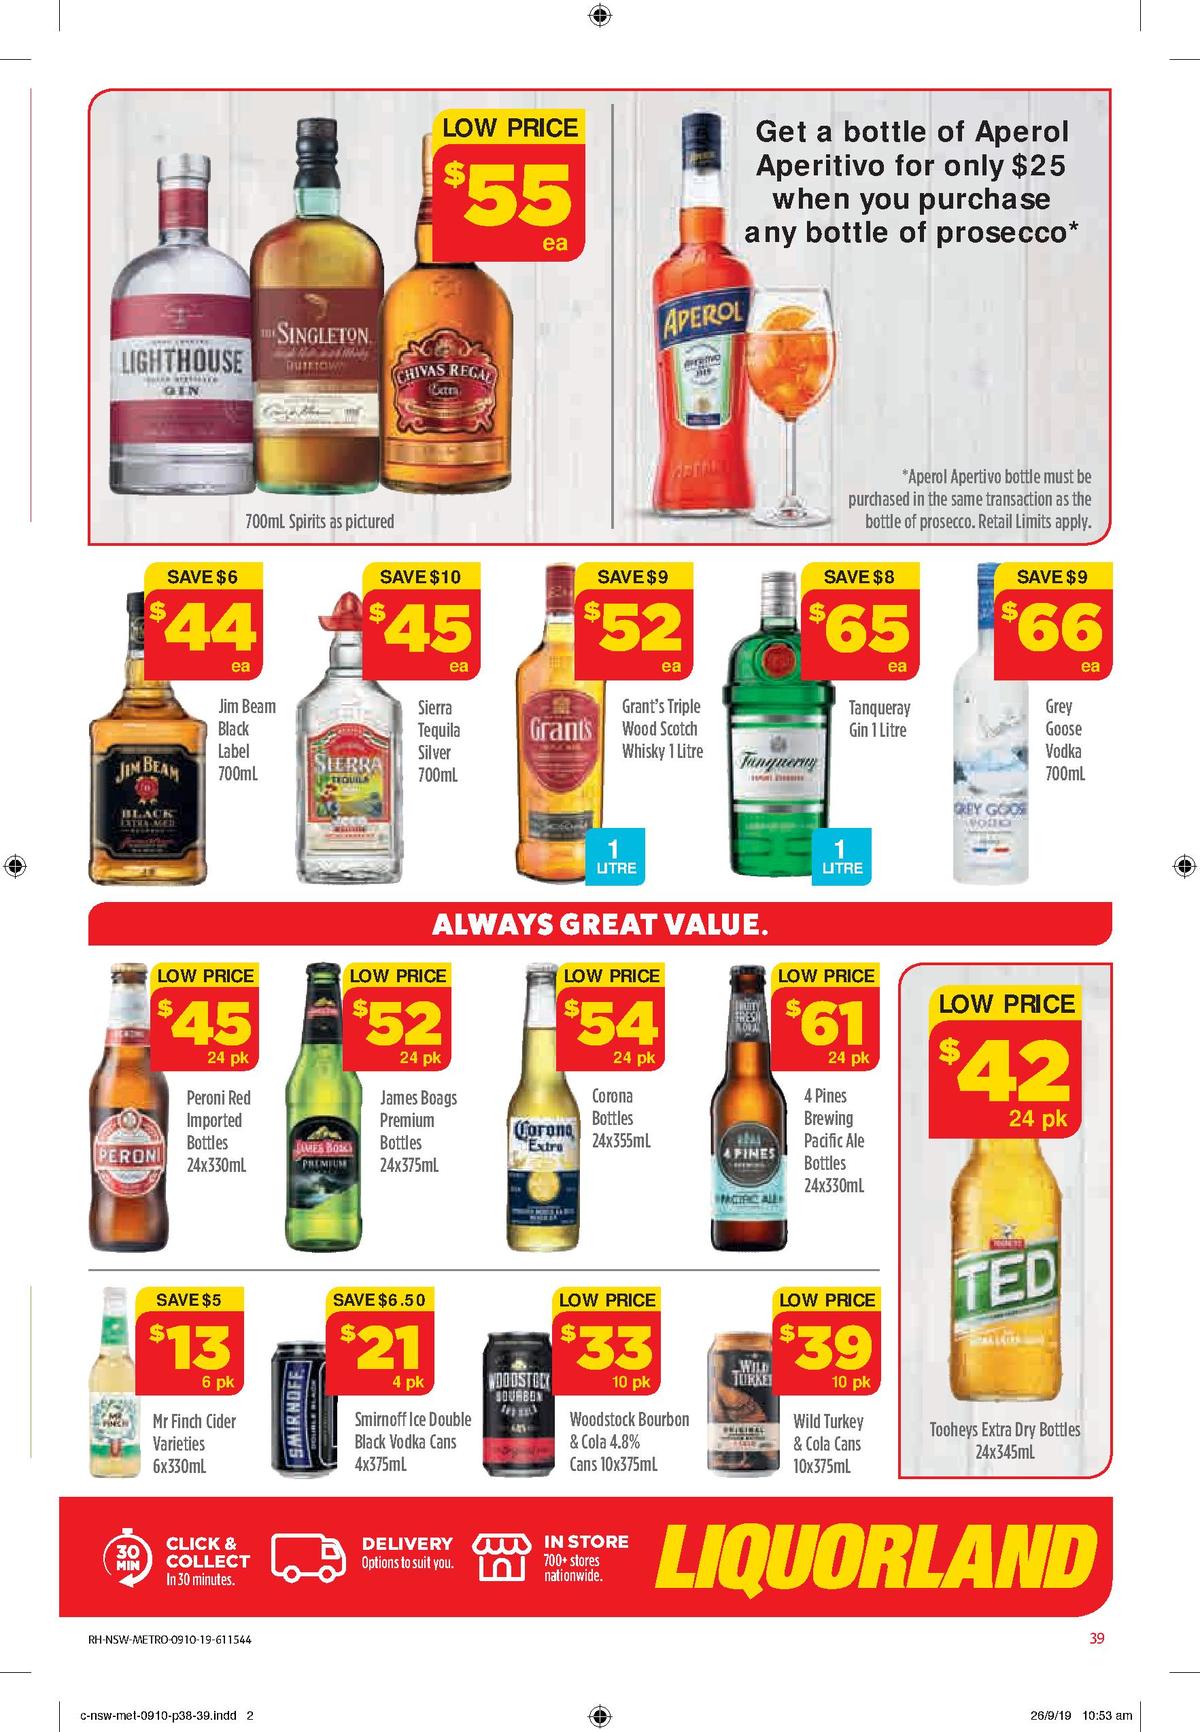 Coles Catalogues from 9 October